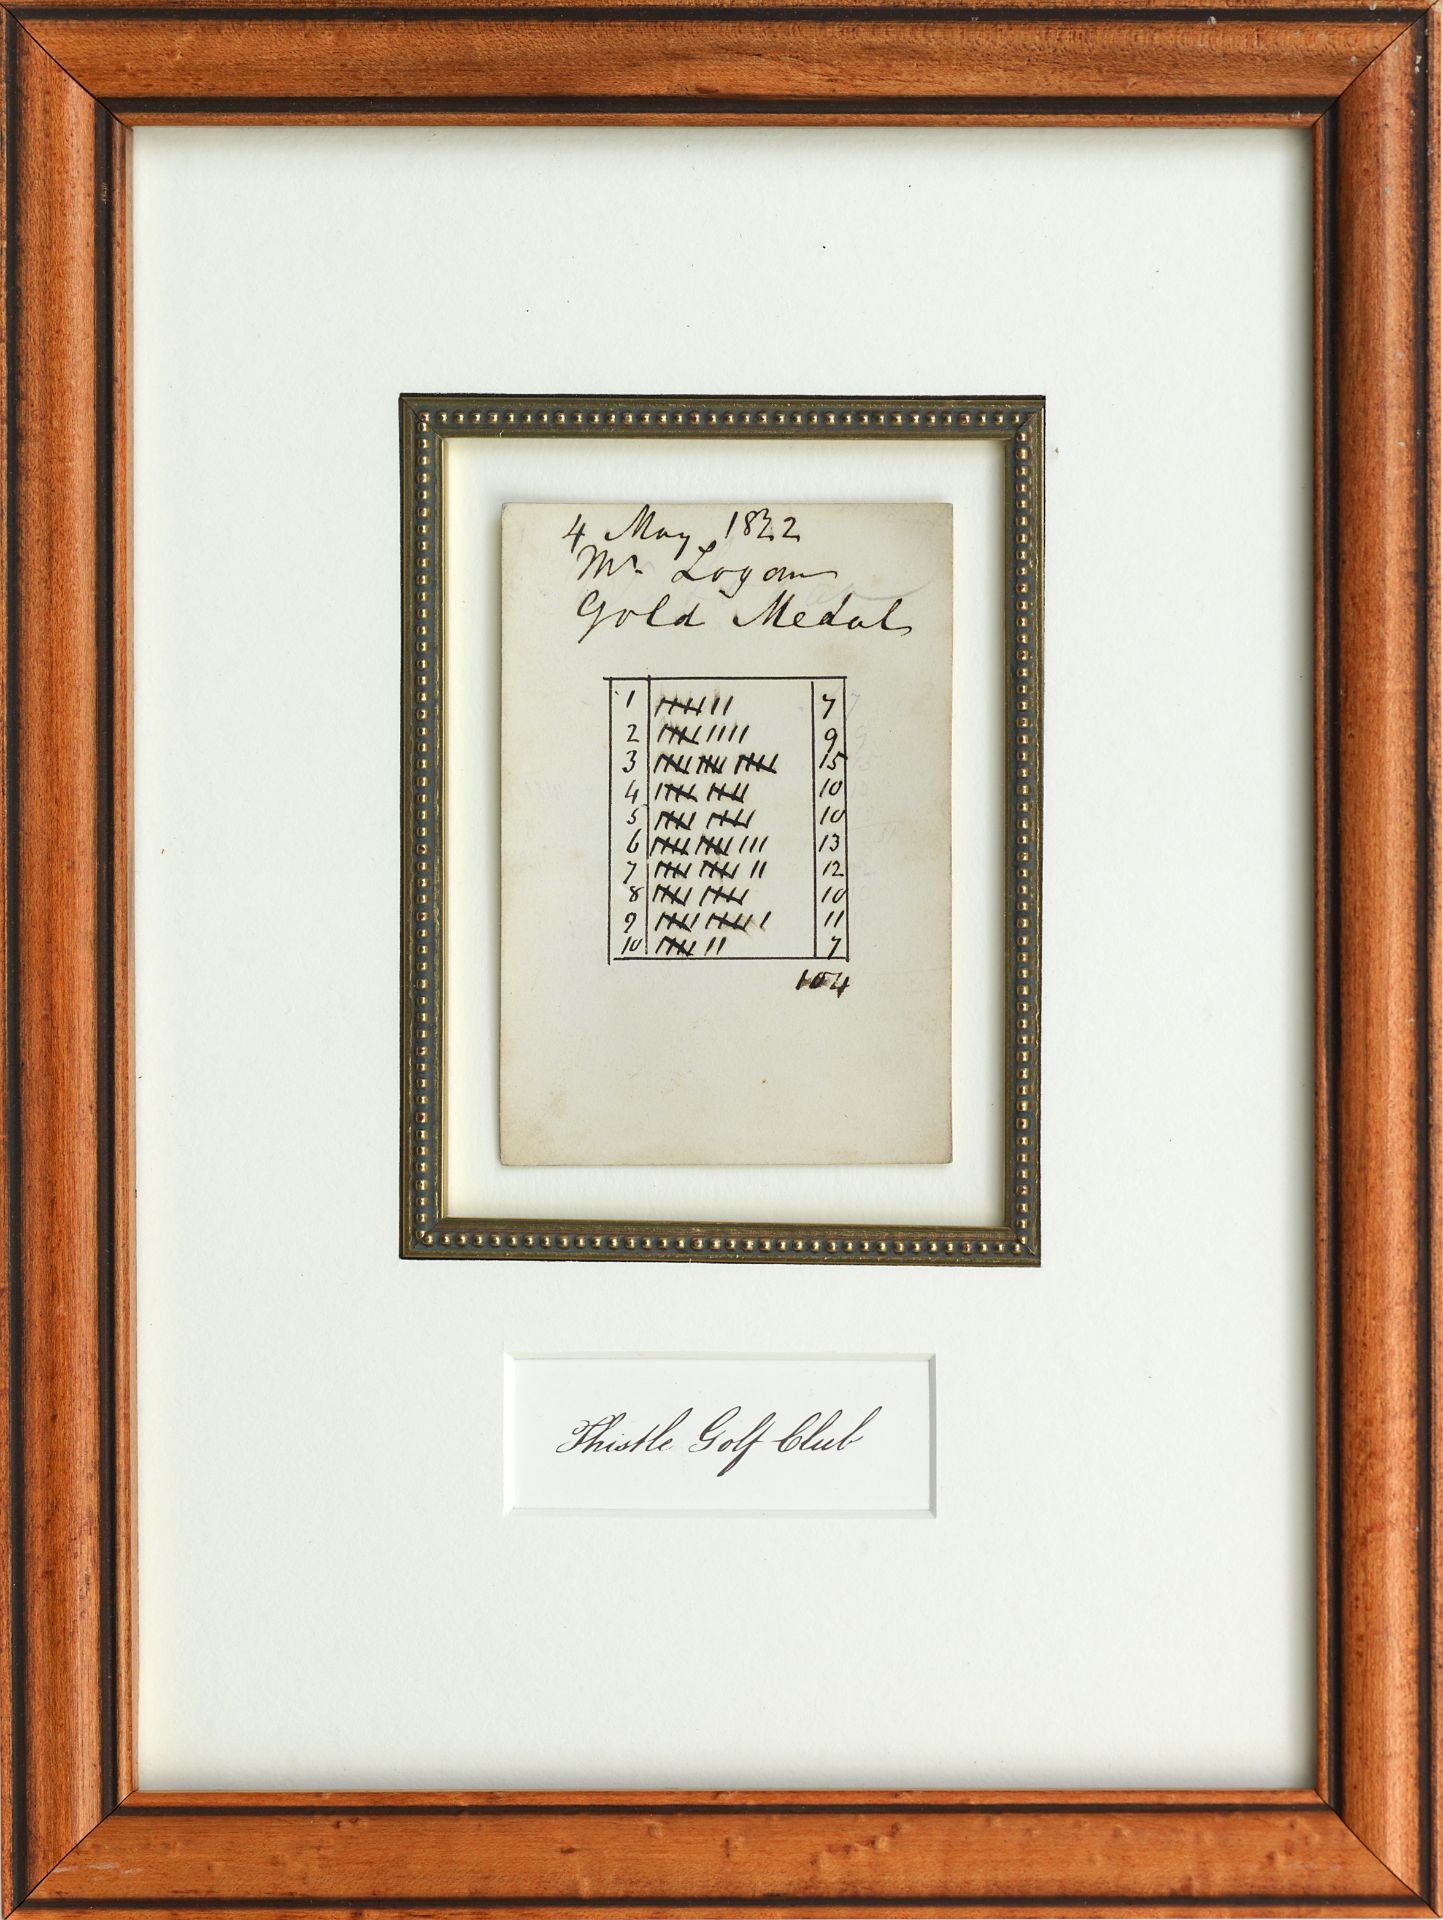 A LEITH THISTLE GOLF CLUB GOLD MEDAL SCORECARD DATED 4 MAY 1822